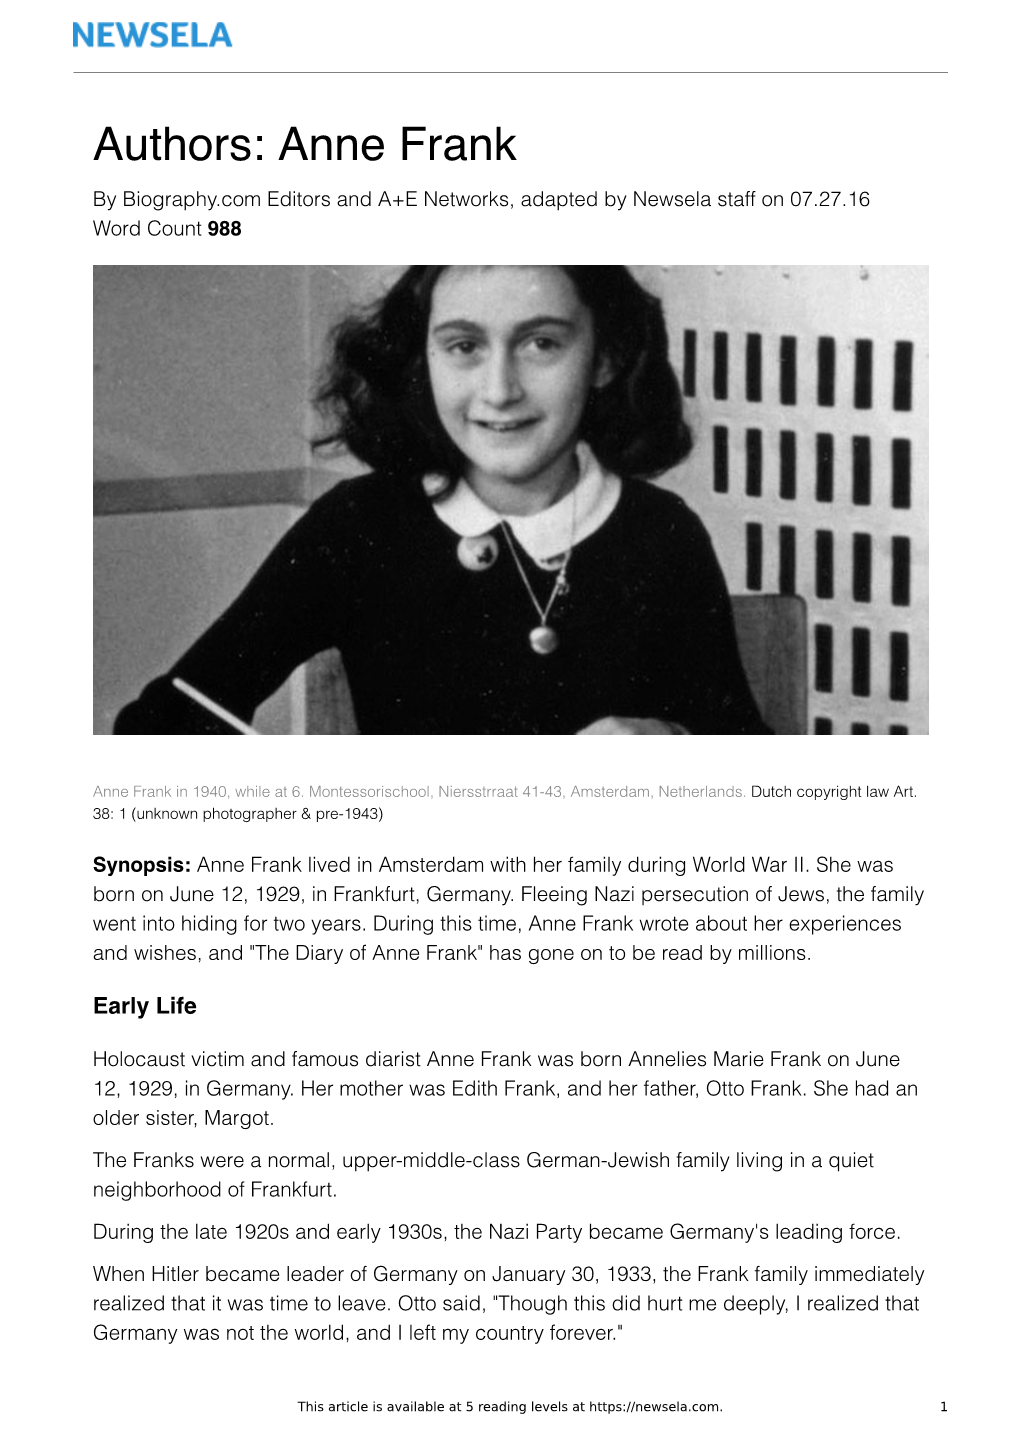 Authors: Anne Frank by Biography.Com Editors and A+E Networks, Adapted by Newsela Staff on 07.27.16 Word Count 988